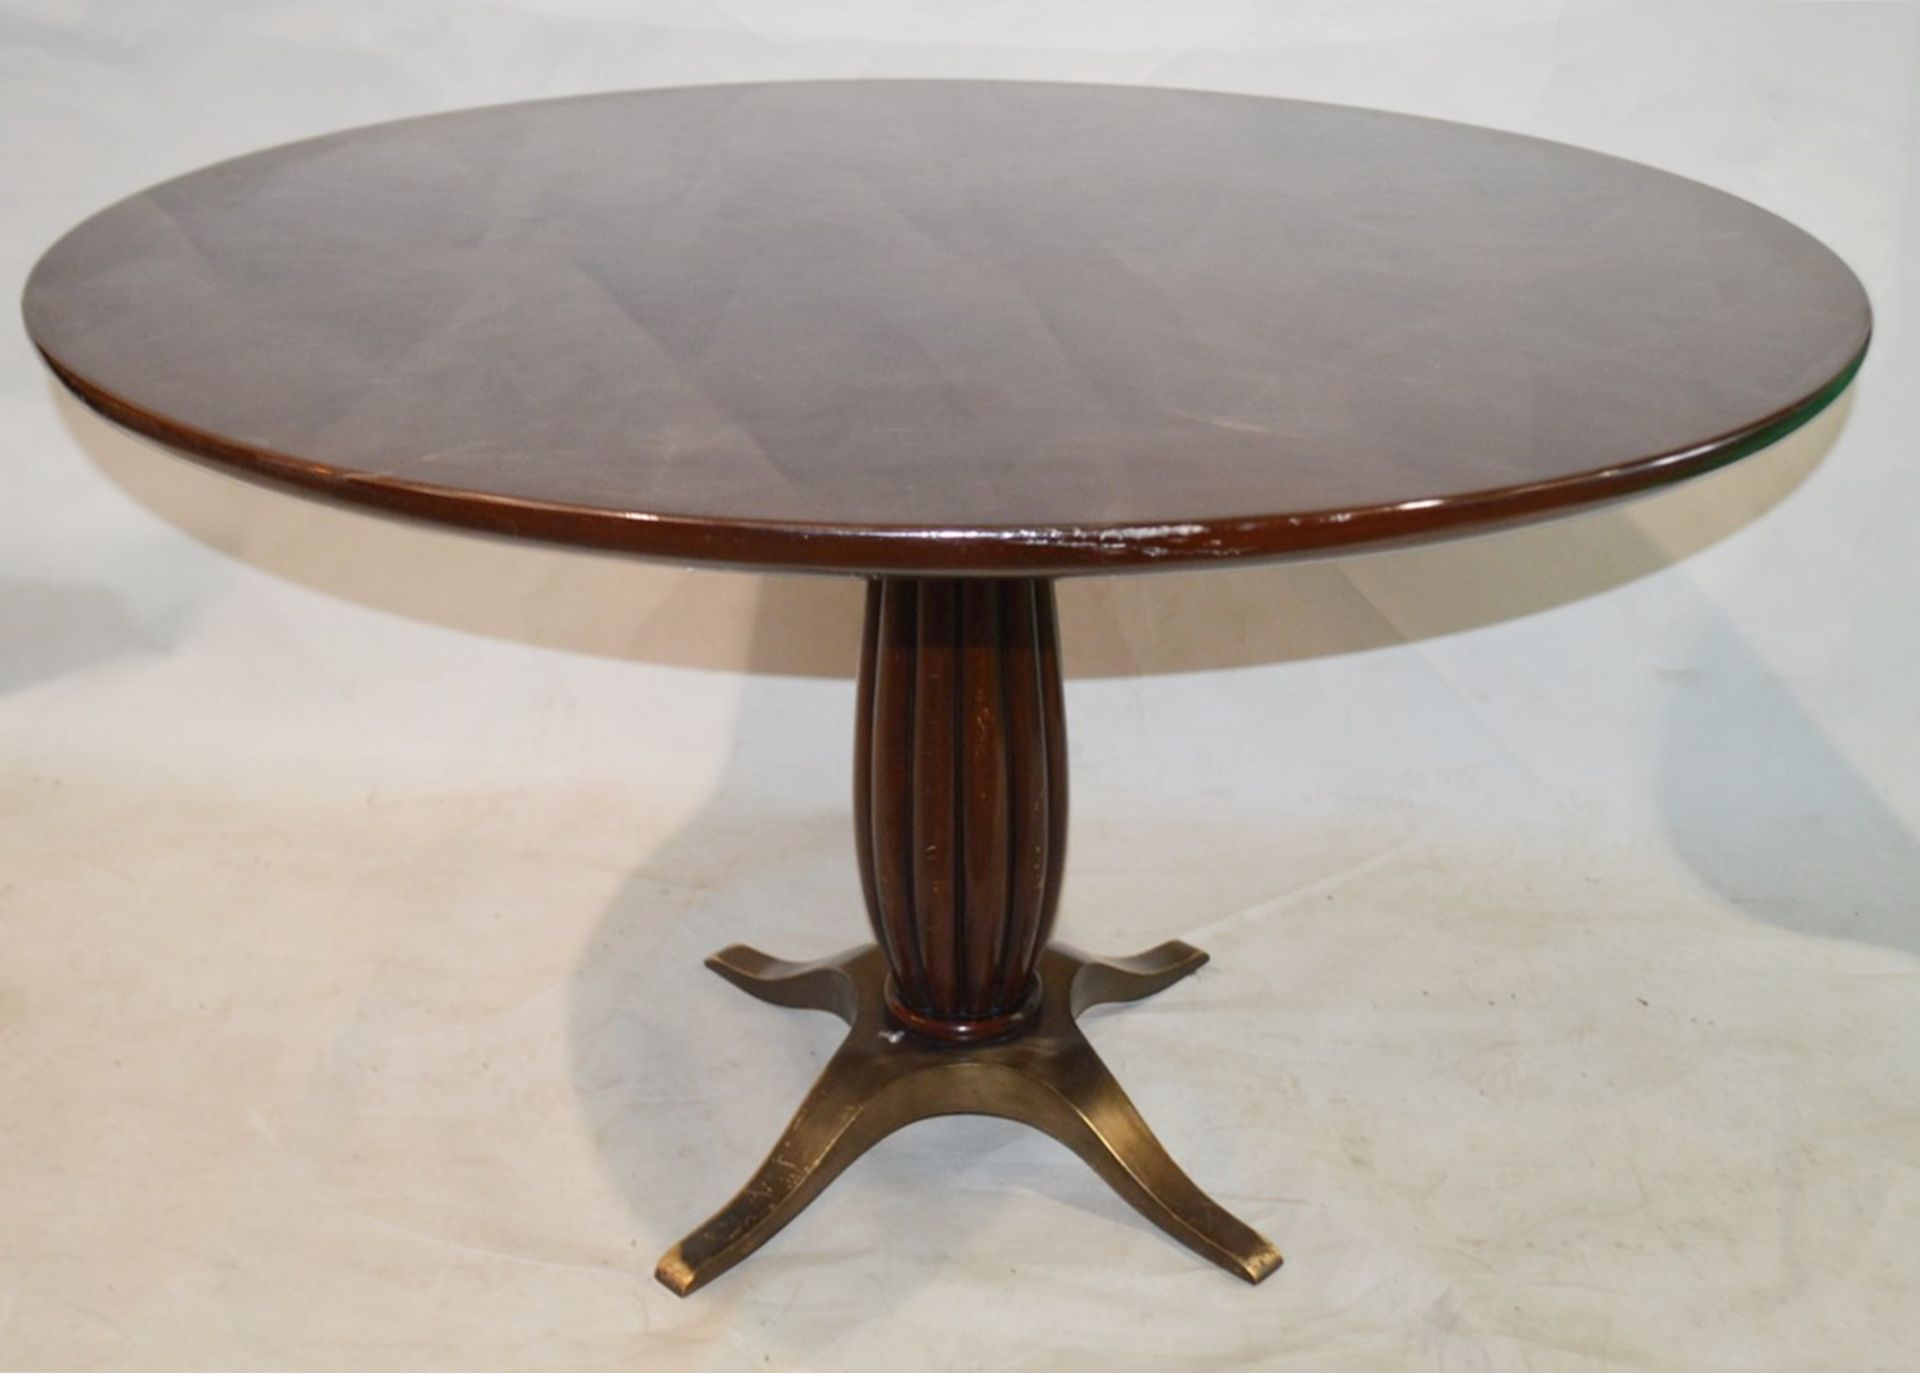 1 x Christopher Guy 'Toulouse' Round Georgian-Style Restaurant Dining Table - Original RRP £4,600.00 - Image 3 of 6